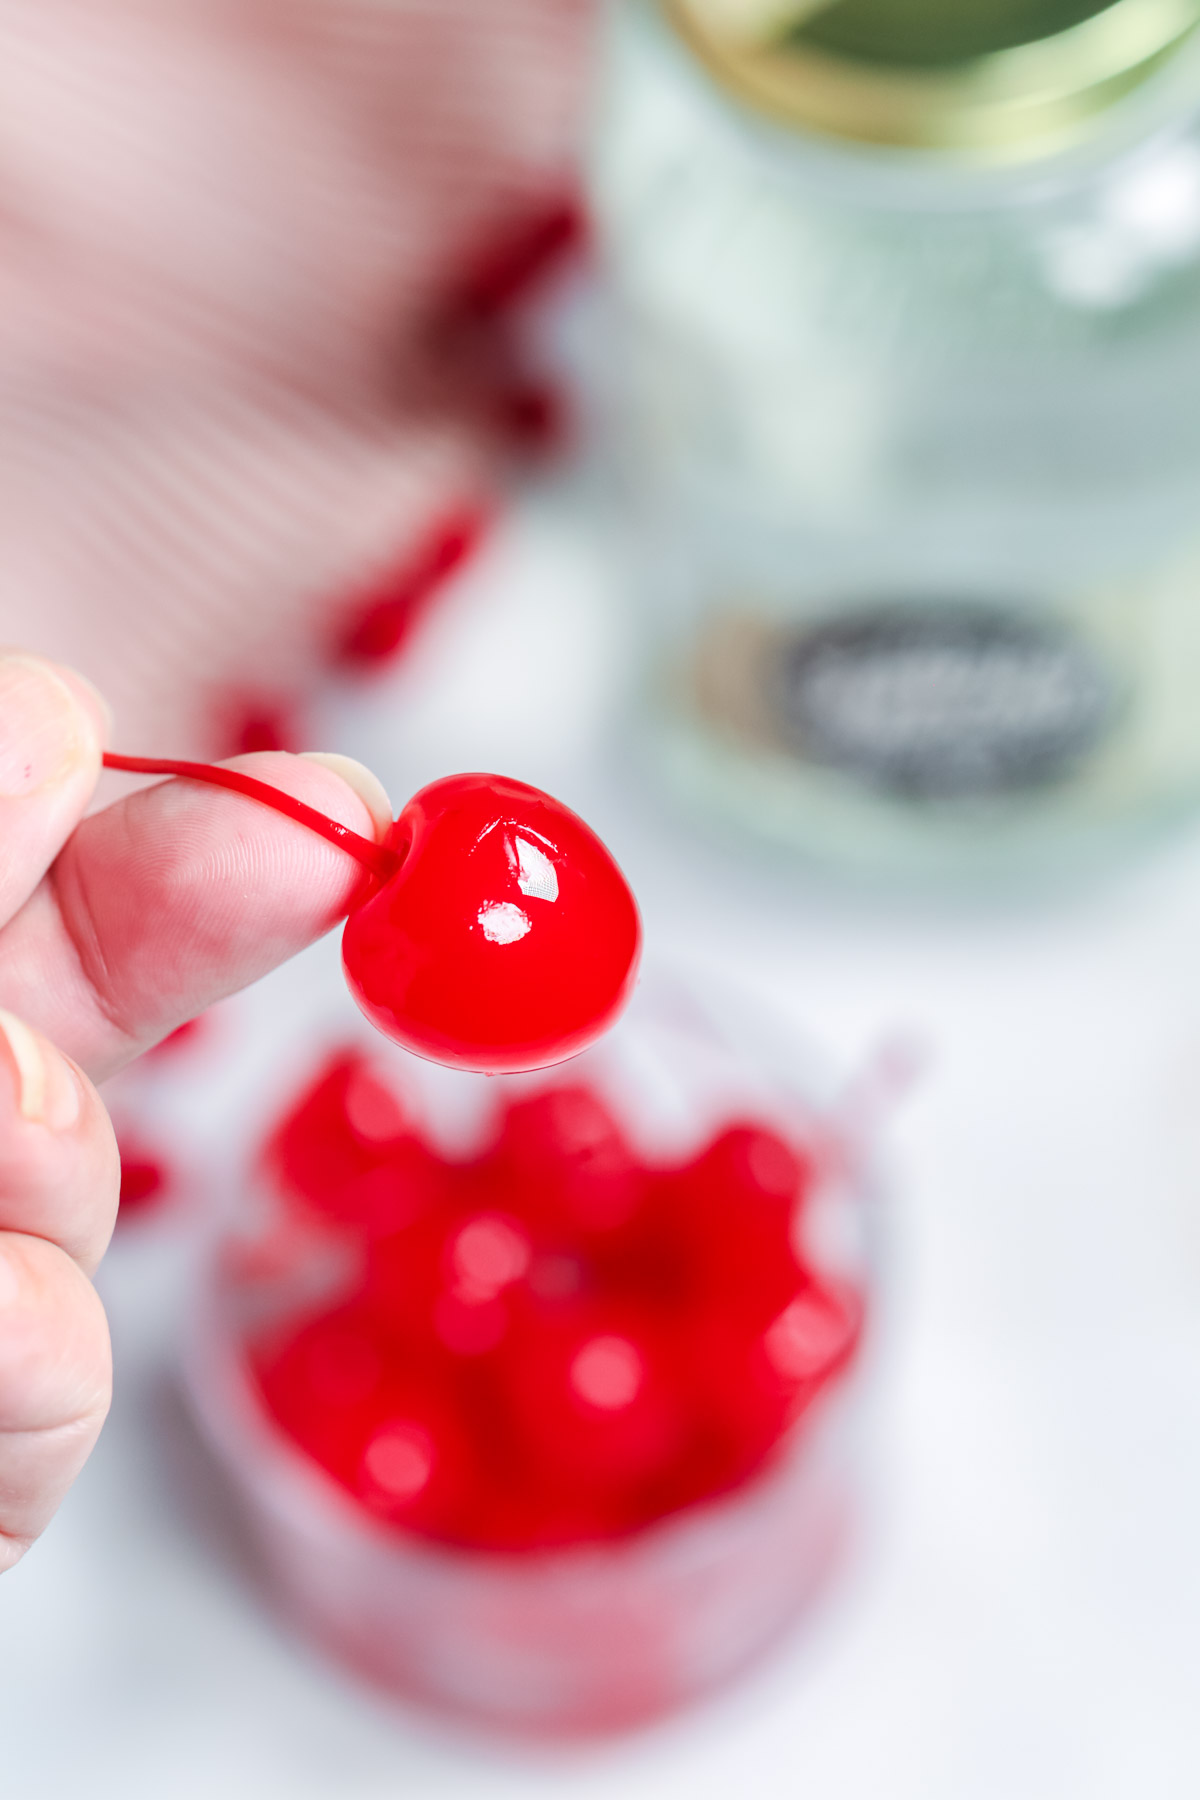 Moonshine Cherries with a close up on a single cherry.